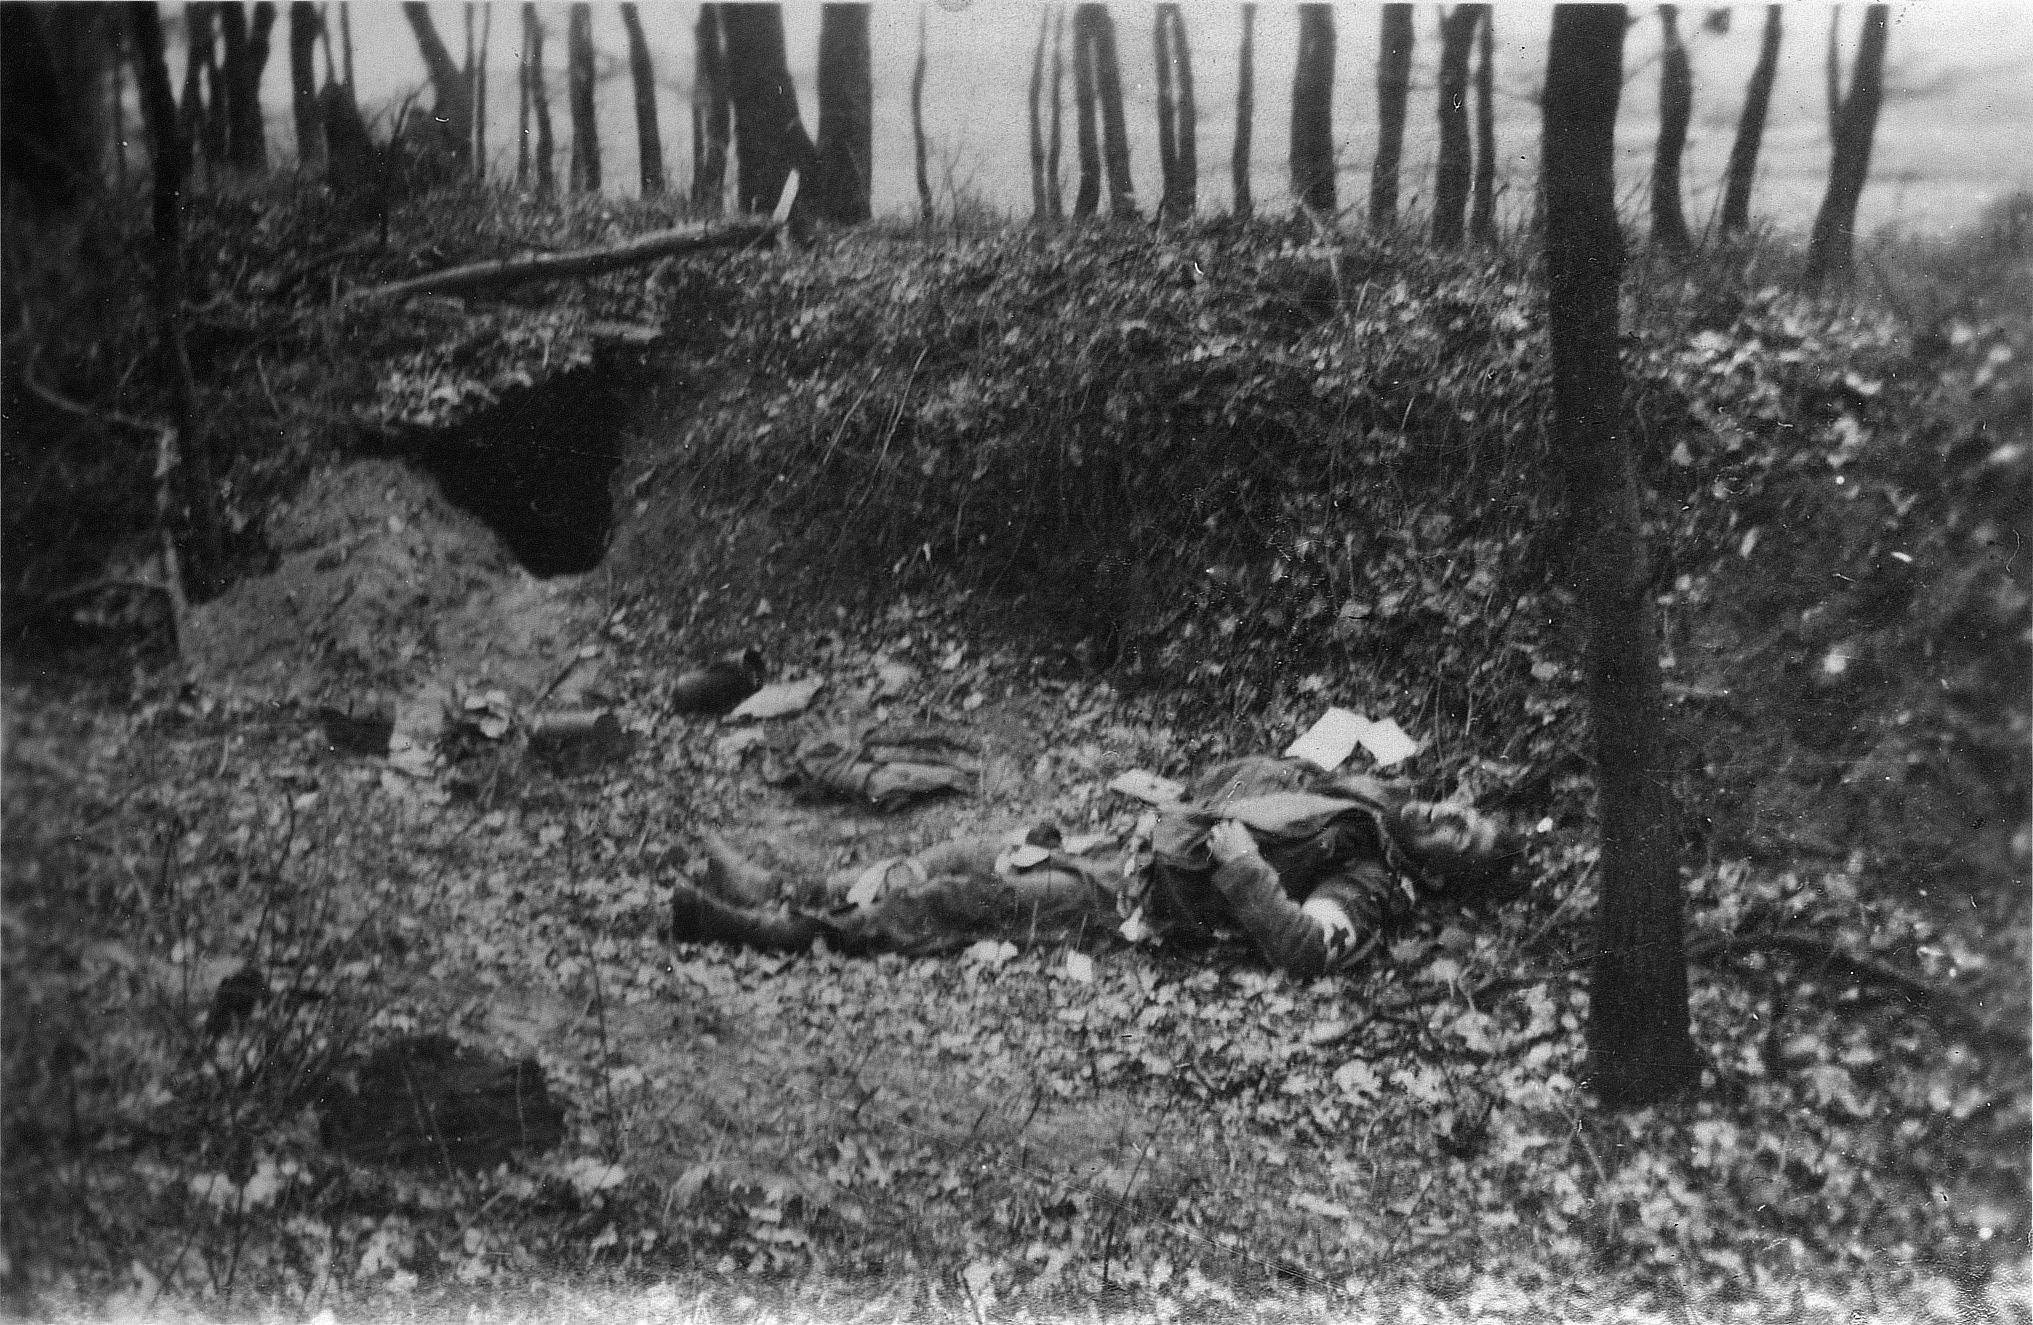  A German medic lies dead near Linne, Holland, February 27, 1945. The 809th was supporting the 314th Infantry Regiment, 79th Infantry Division, attacking through Linne toward the Roer River, and stood ready to repel any German armored counterattacks. The battalion crossed the Roer River on February 28, 1945.